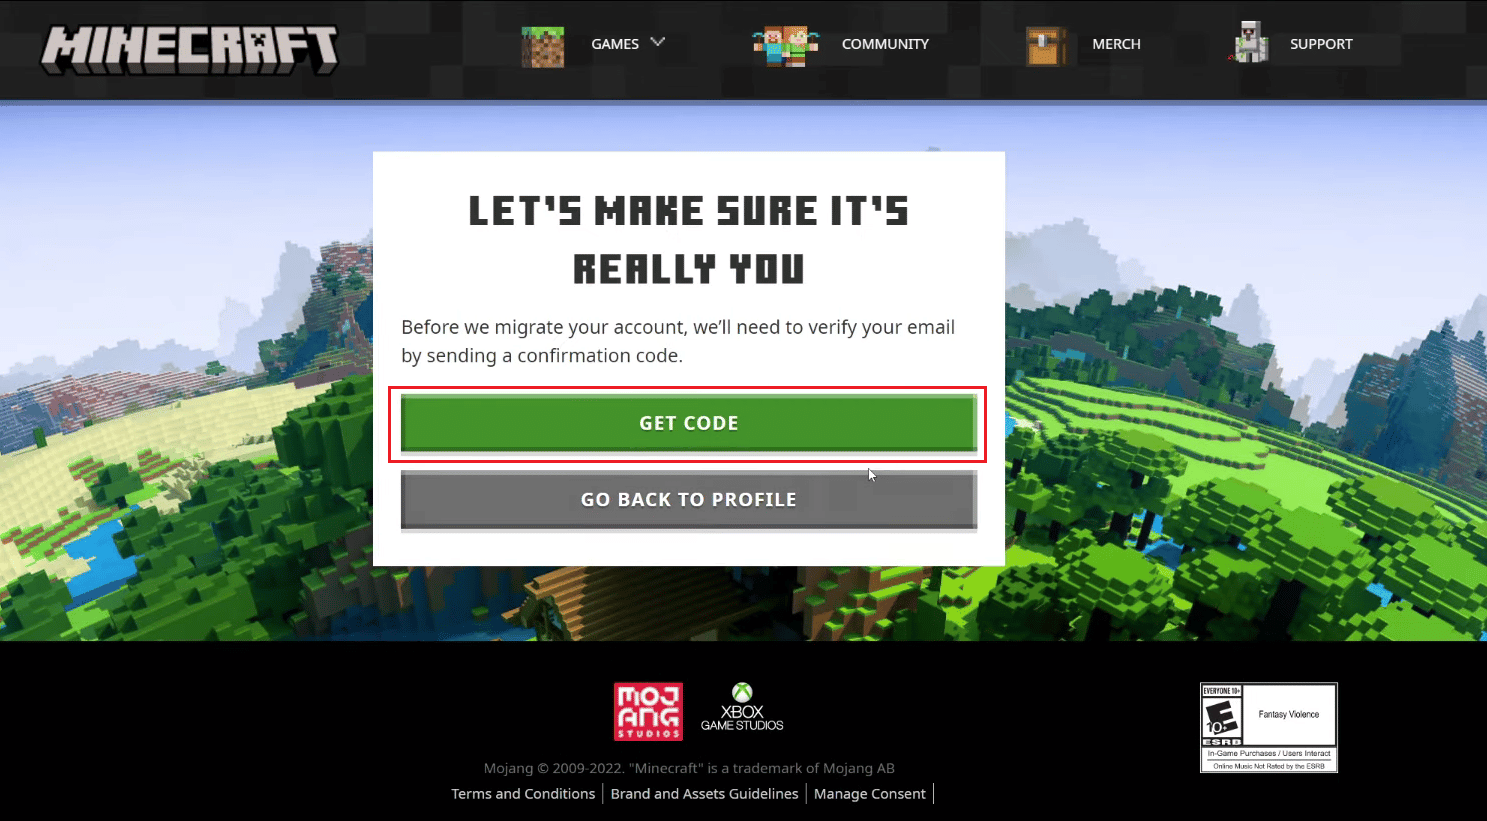 Click on GET CODE to receive a verification code on your Minecraft registered email address